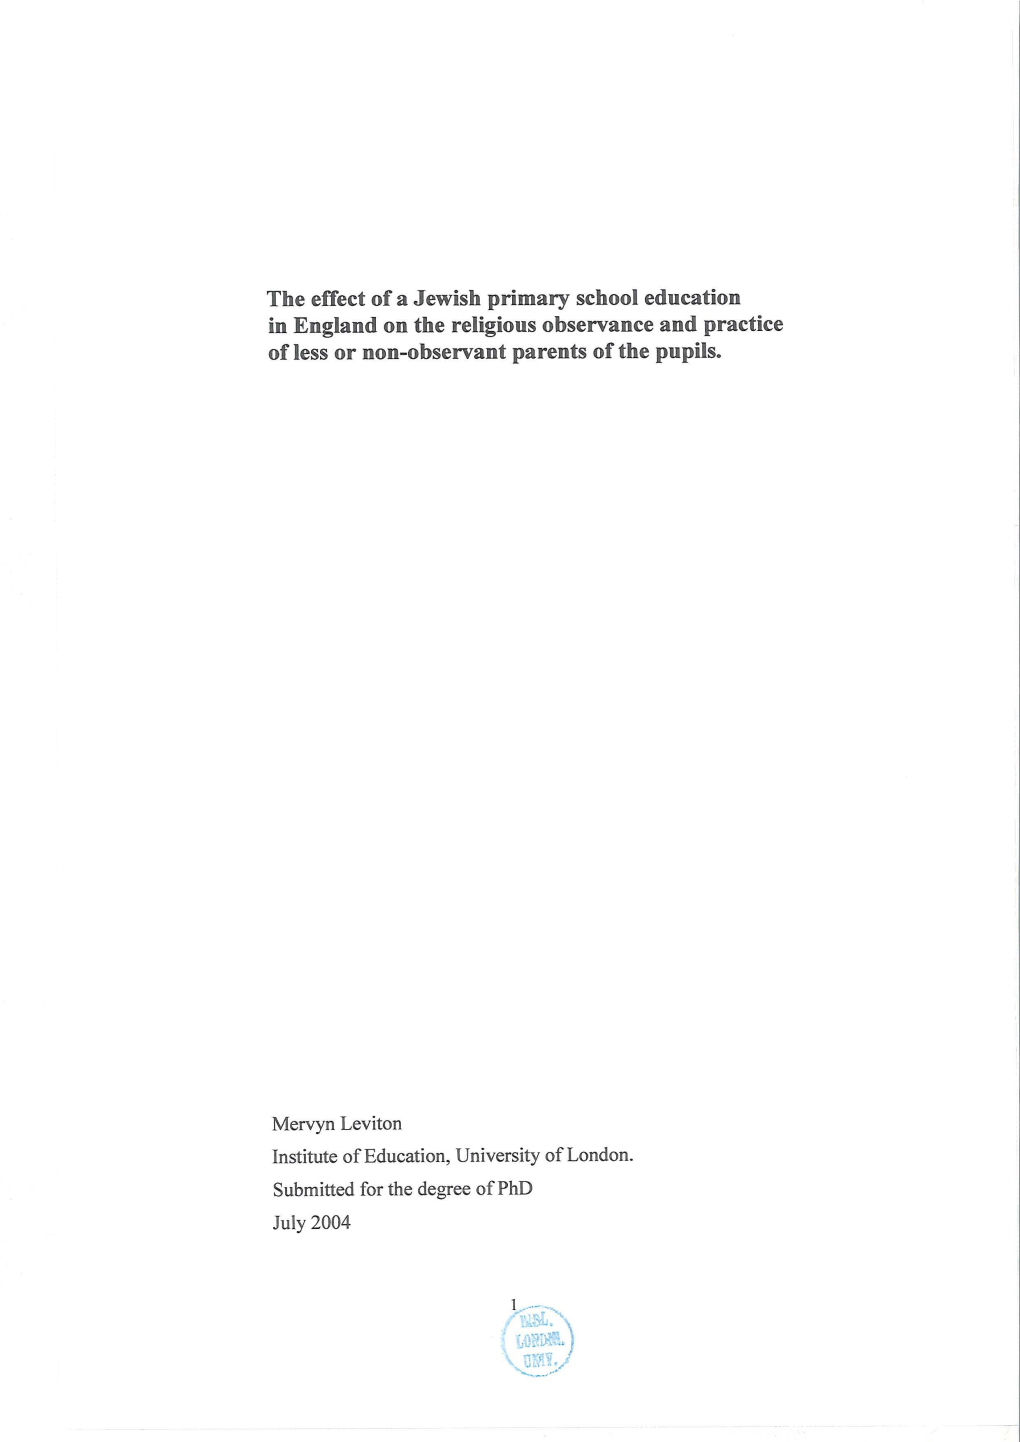 The Effect of a Jewish Primary School Education in England on the Religious Observance and Practice of Less Or Non-Observant Parents Ofthe Pupils